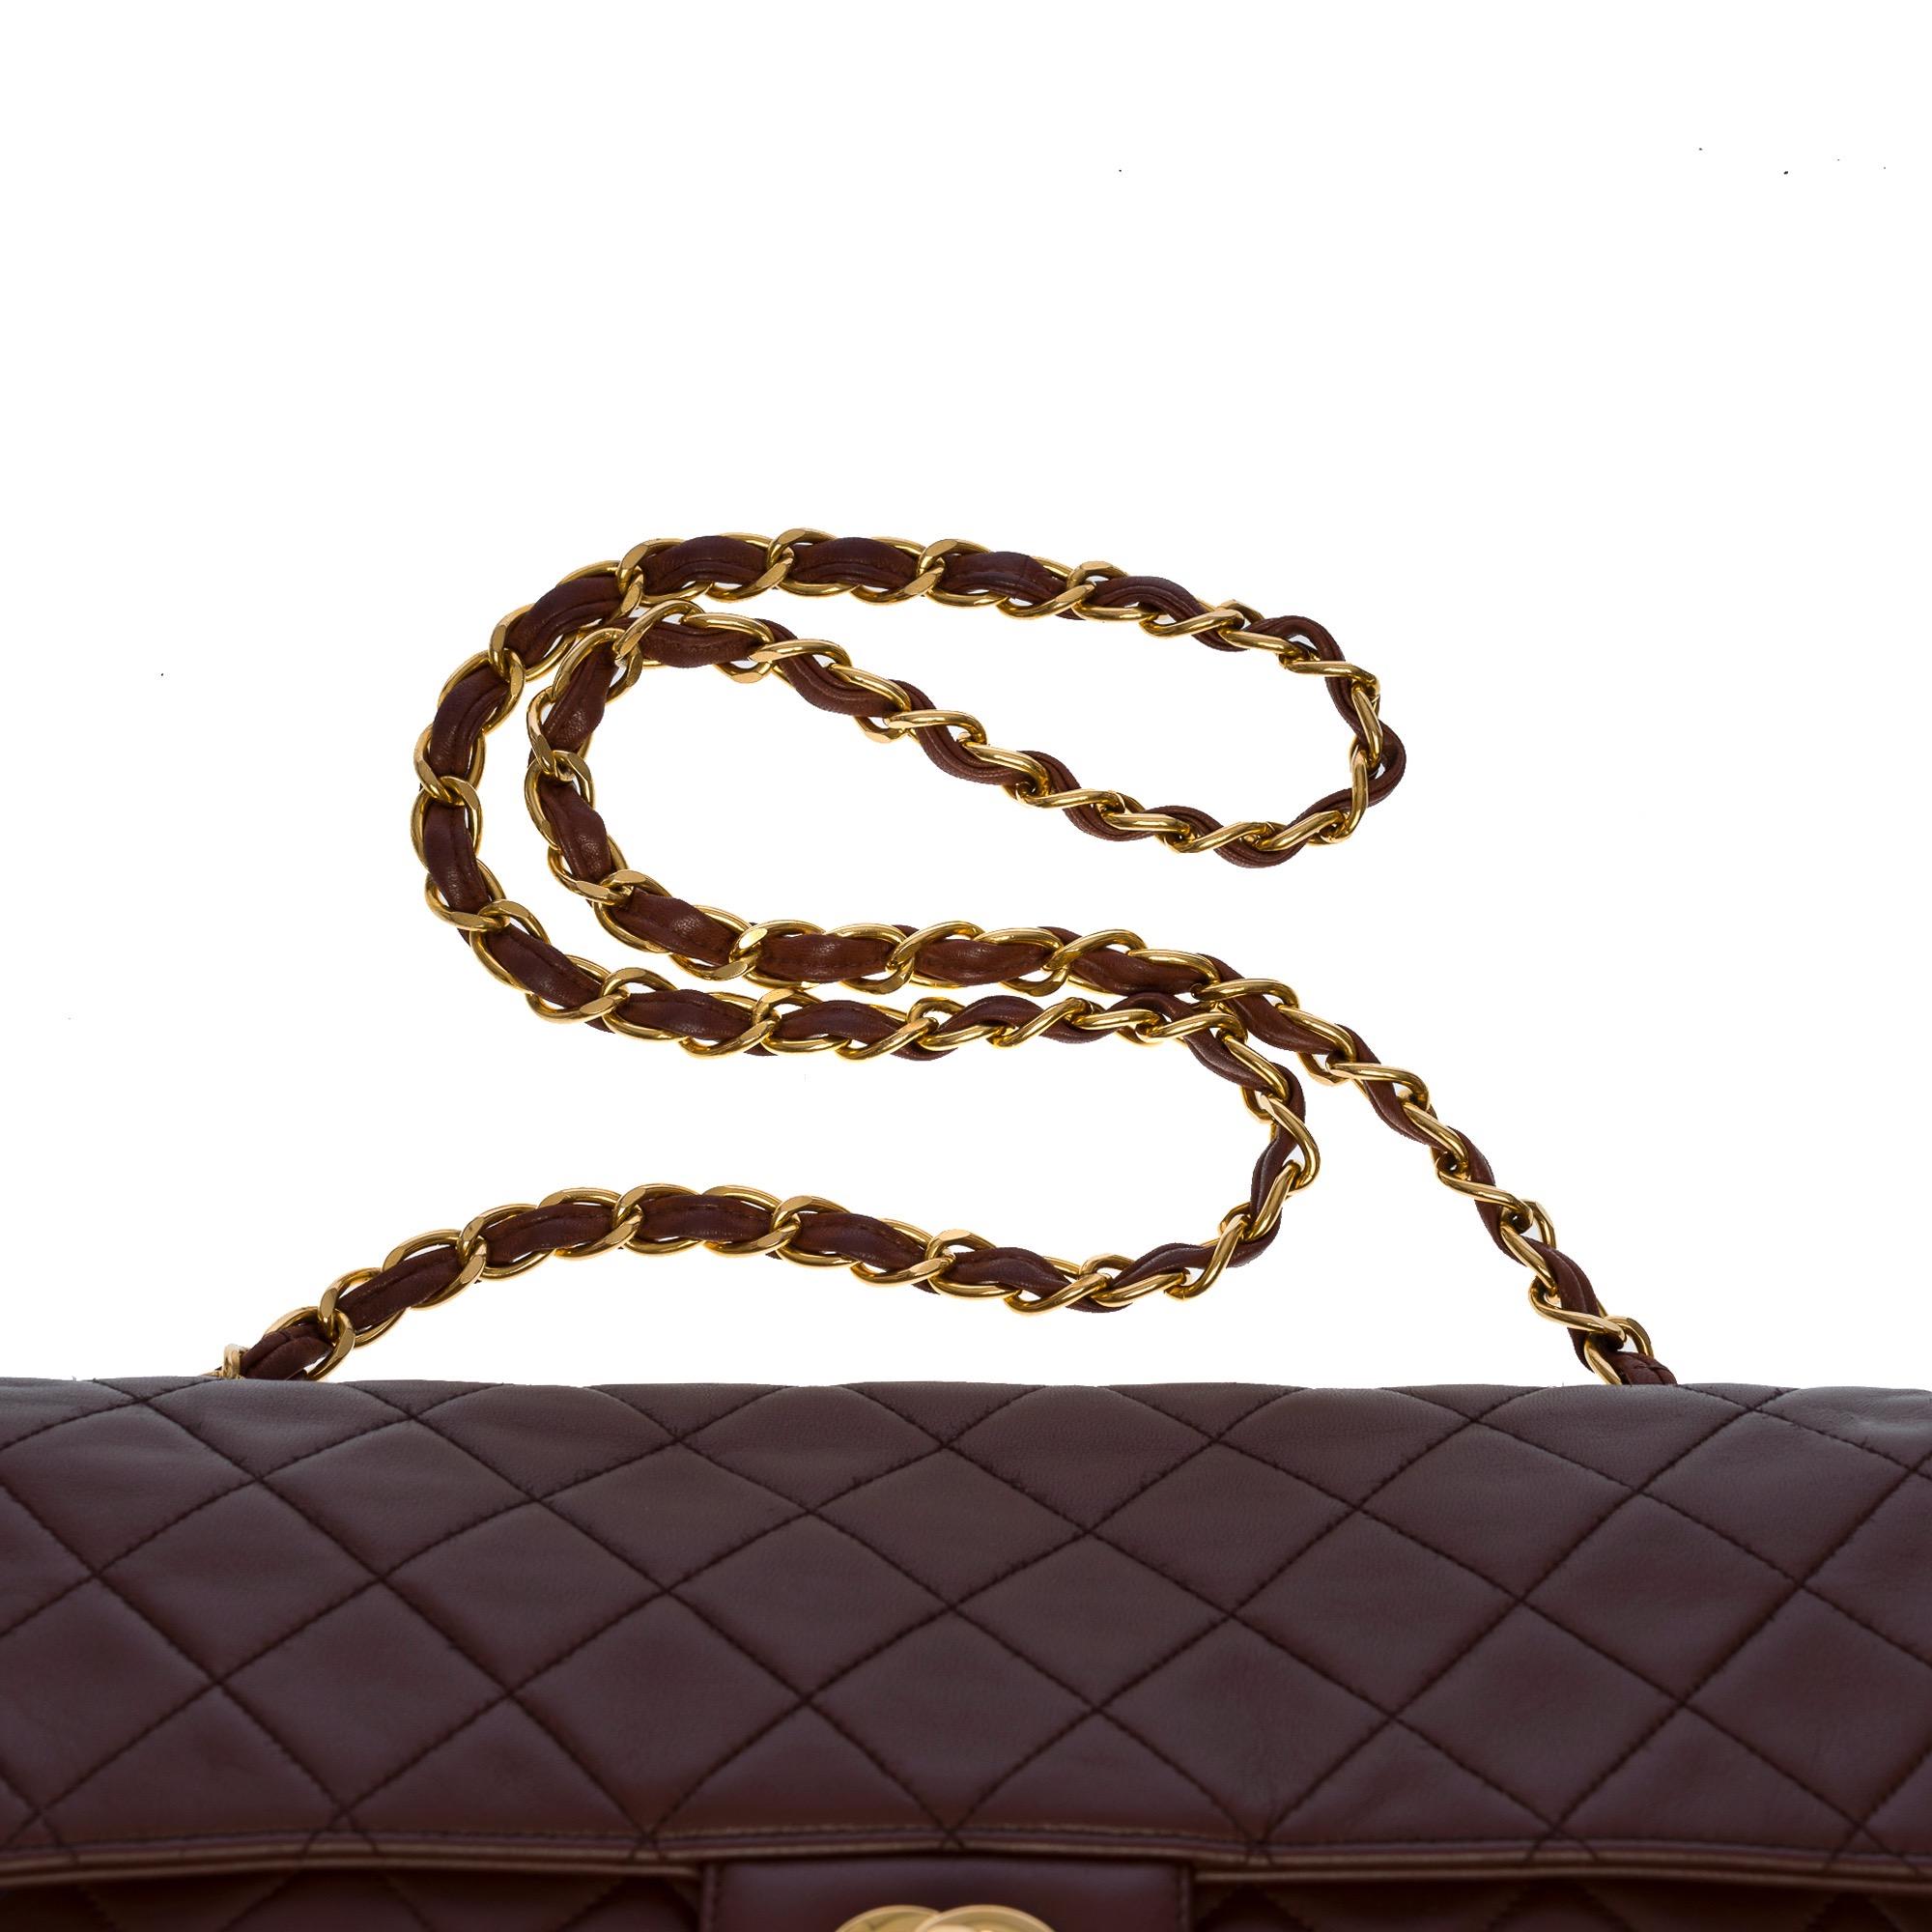 Majestic Chanel Timeless/Classic jumbo flap bag in brown quilted leather, GHW For Sale 3